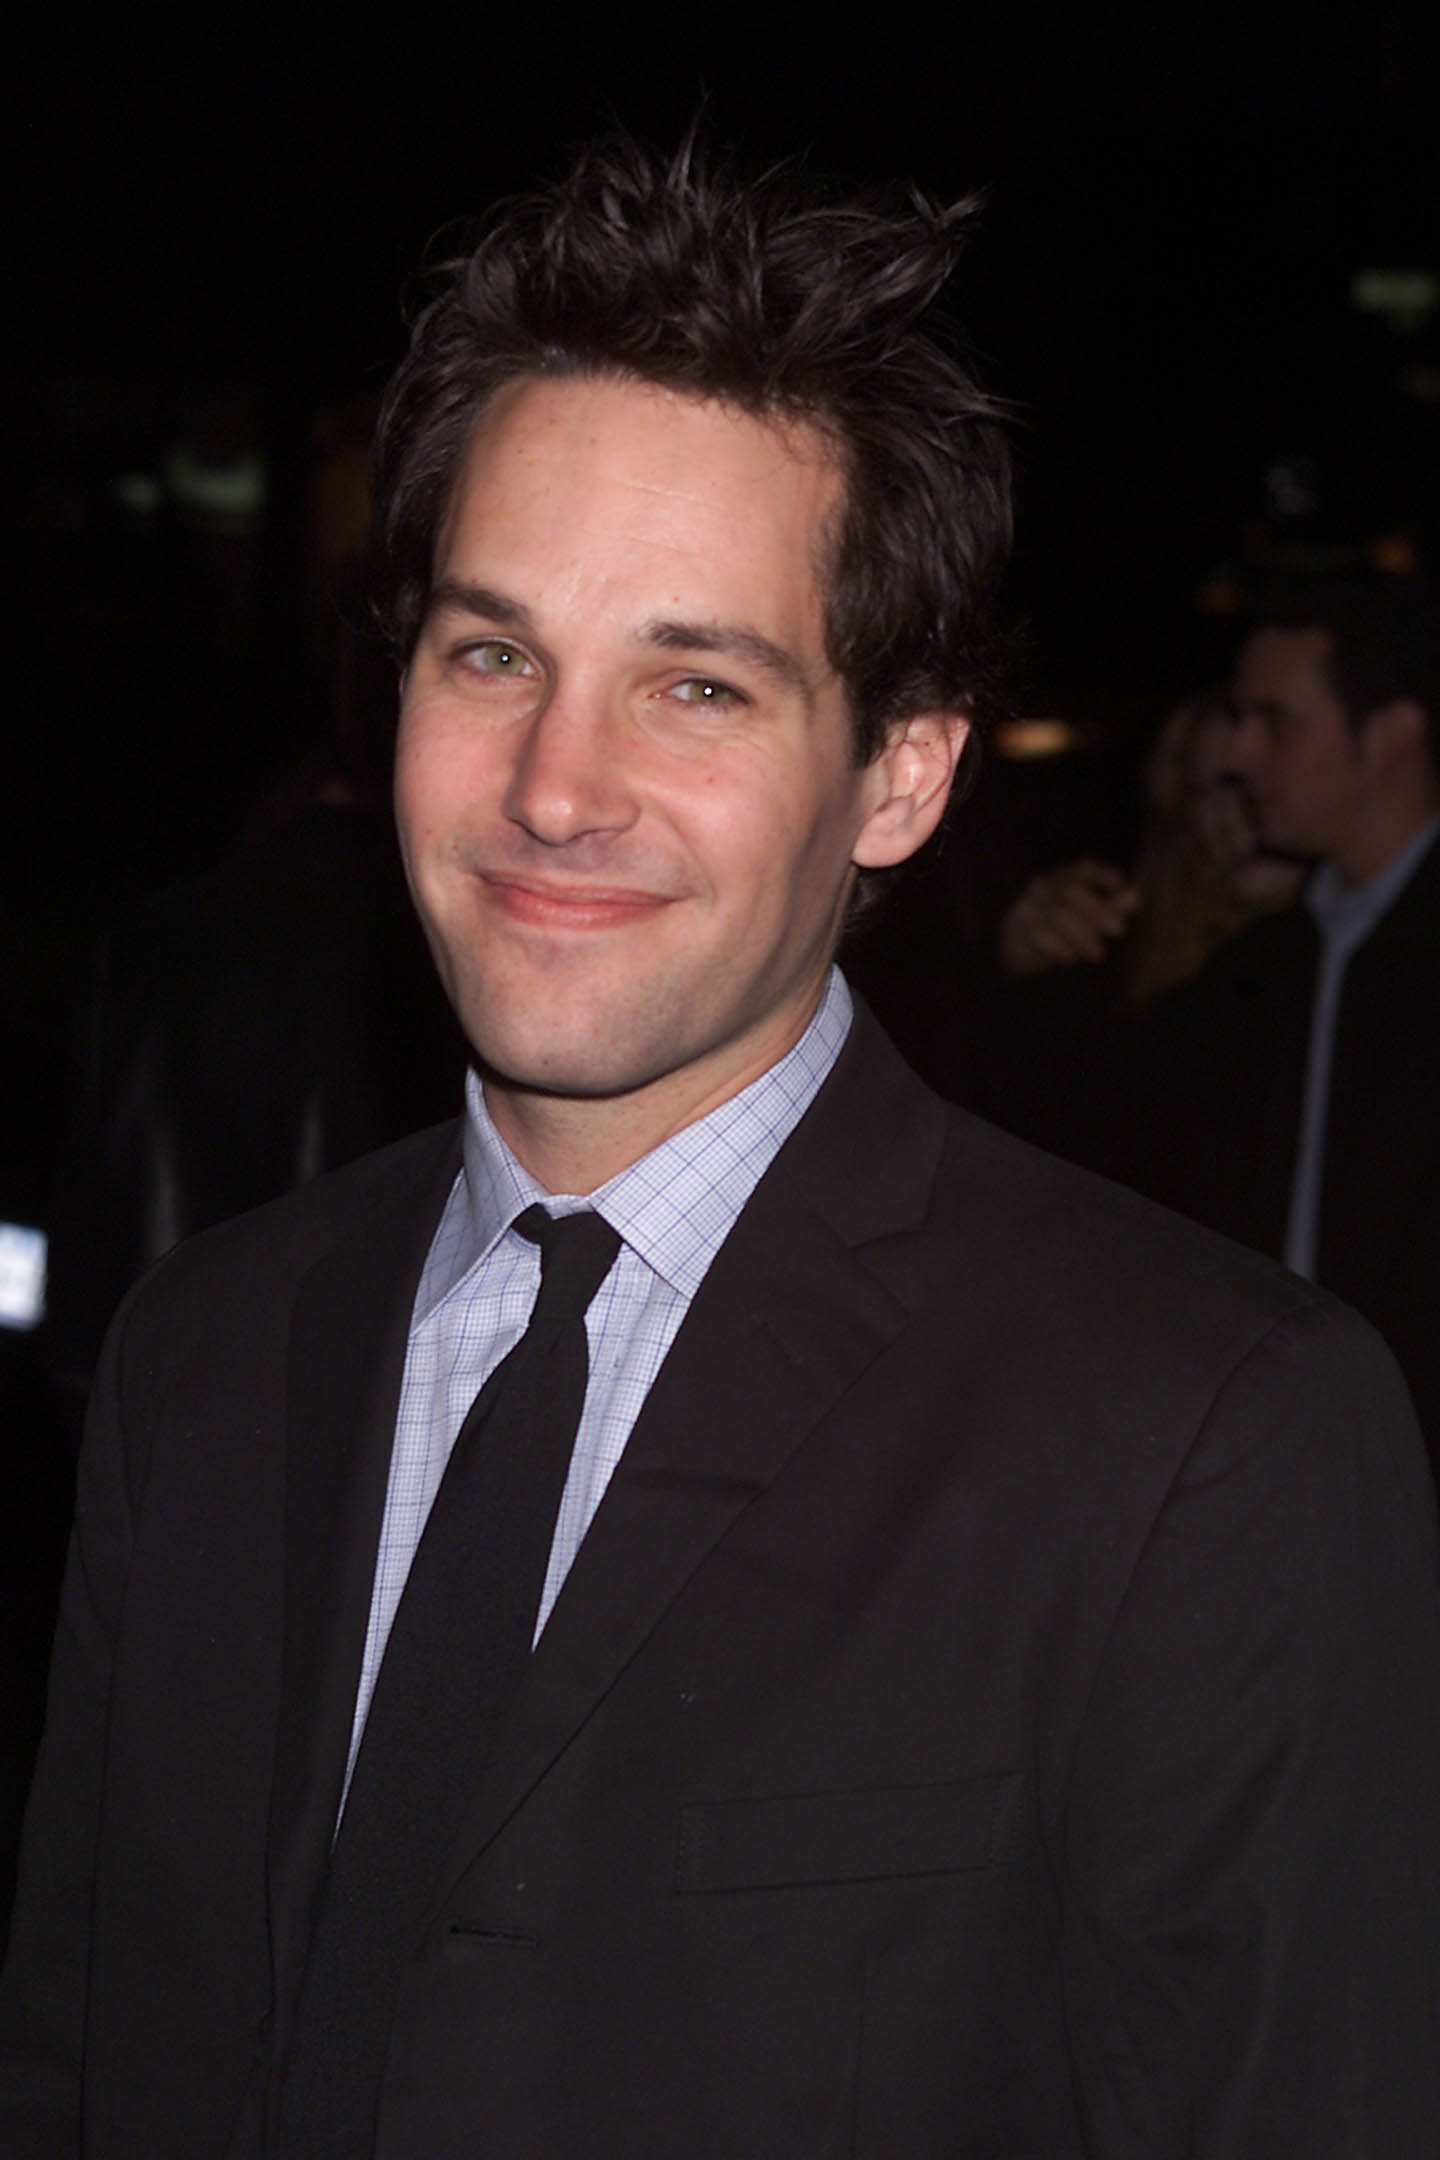 The Shape of Things Opening Night, Paul Rudd's Funniest Moments in Film and Television